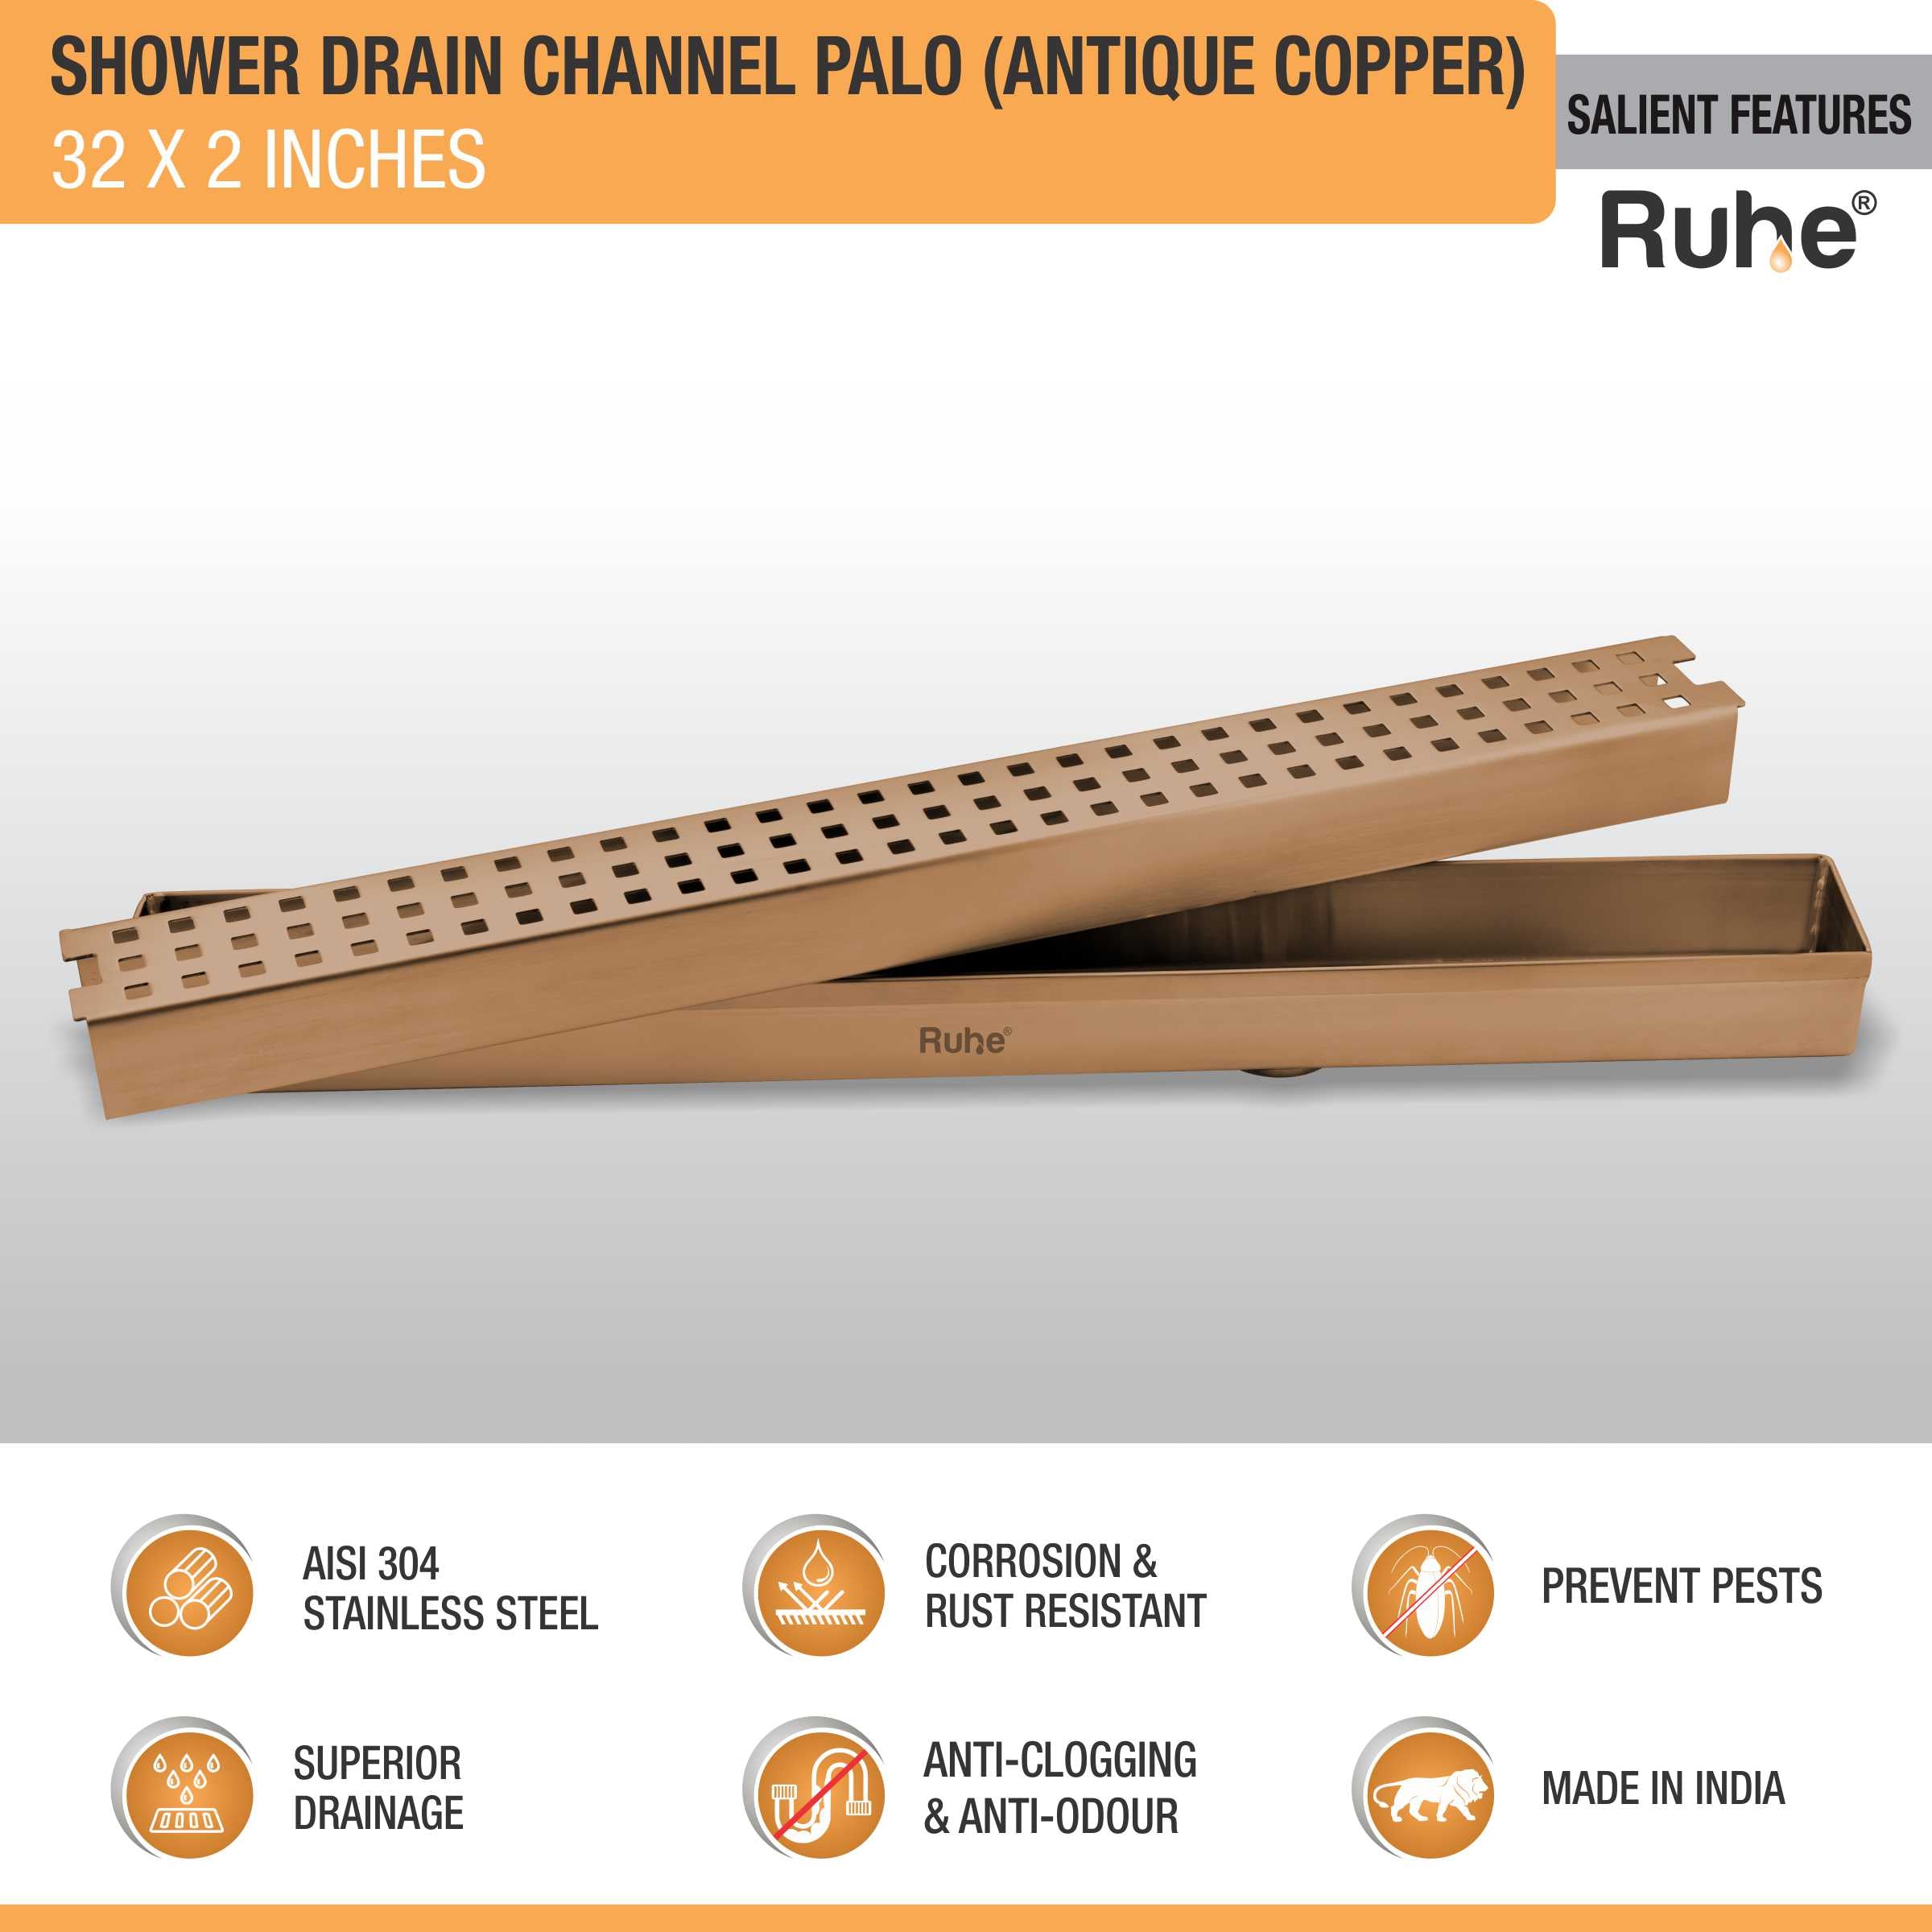 Palo Shower Drain Channel (32 x 2 Inches) ROSE GOLD/ANTIQUE COPPER features